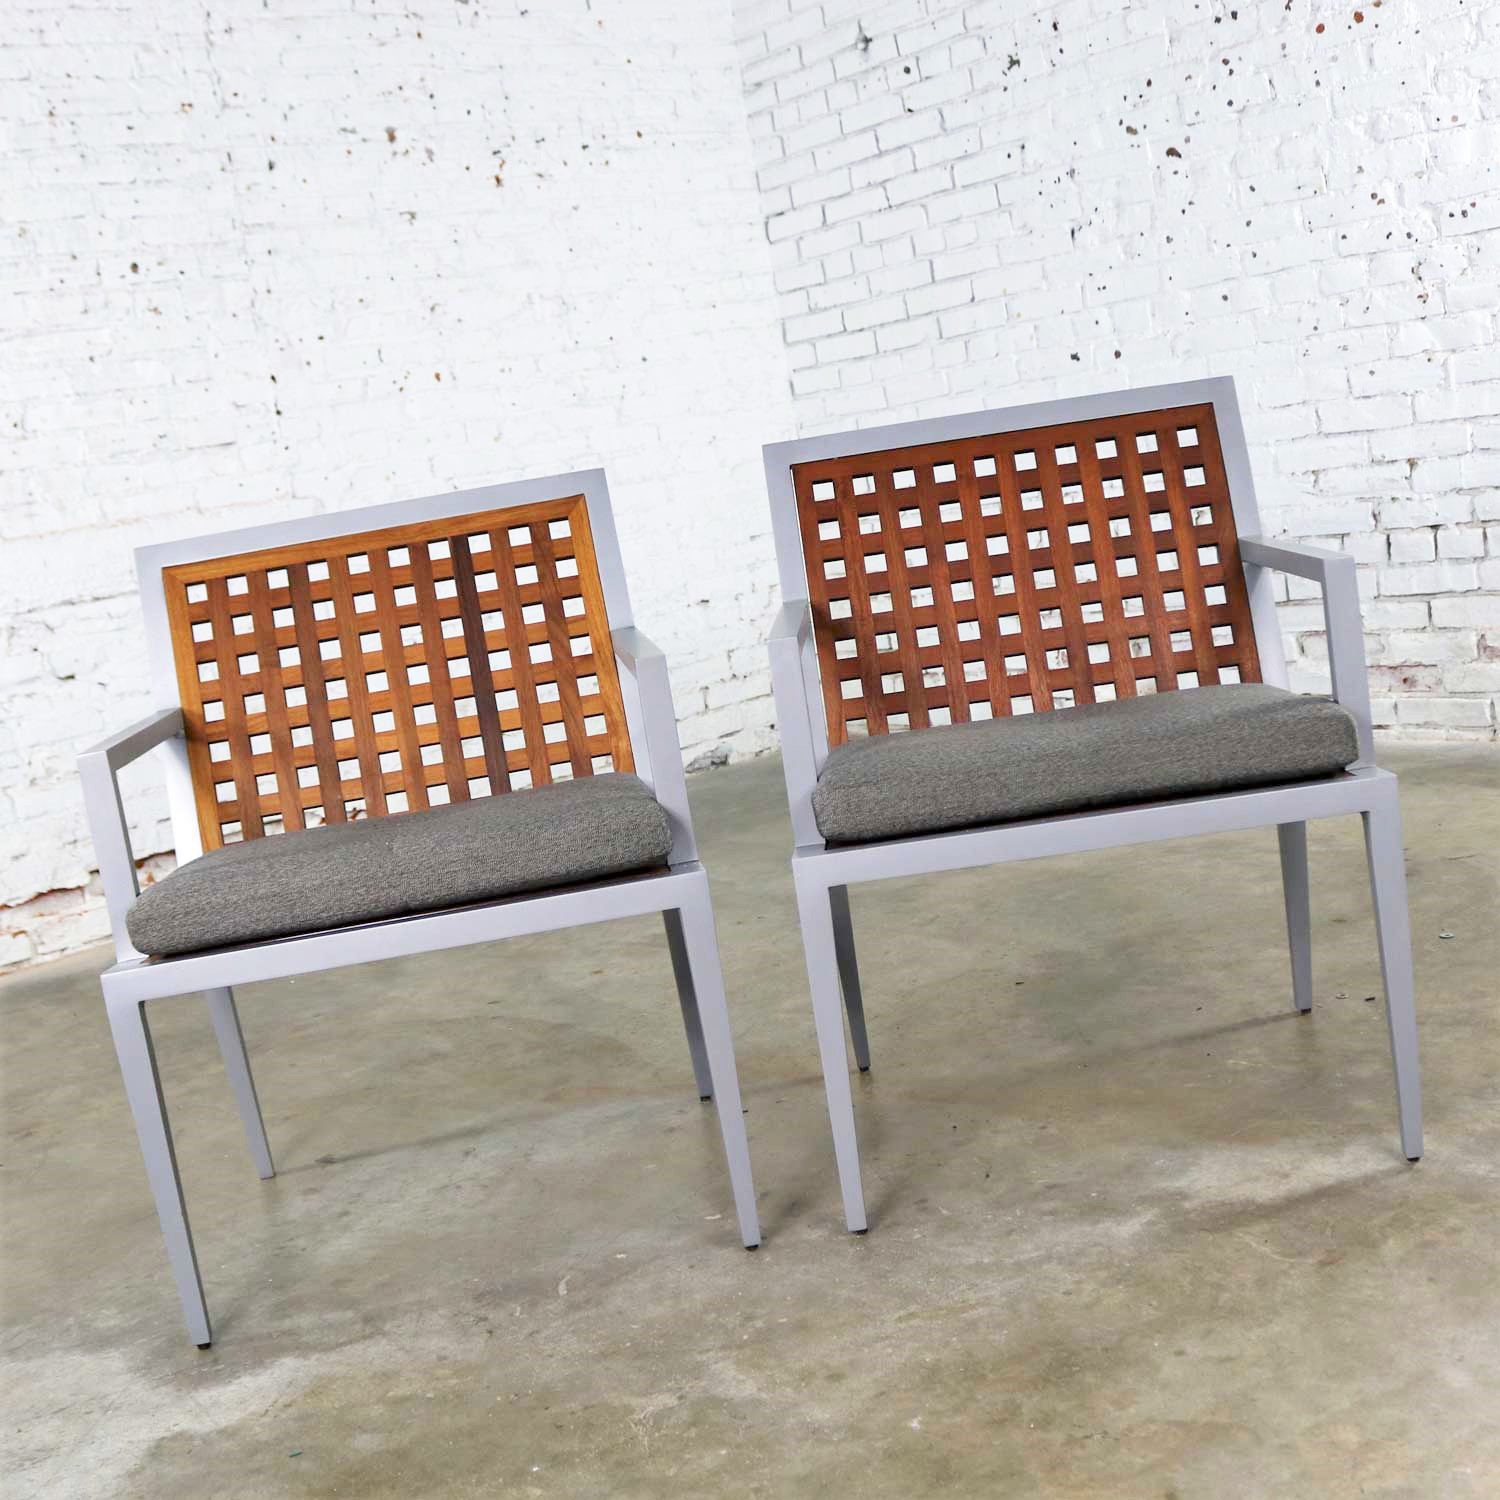 Pair of Aluminum and Teak Archetype Patio Chairs by Michael Vanderbyl for McGuire